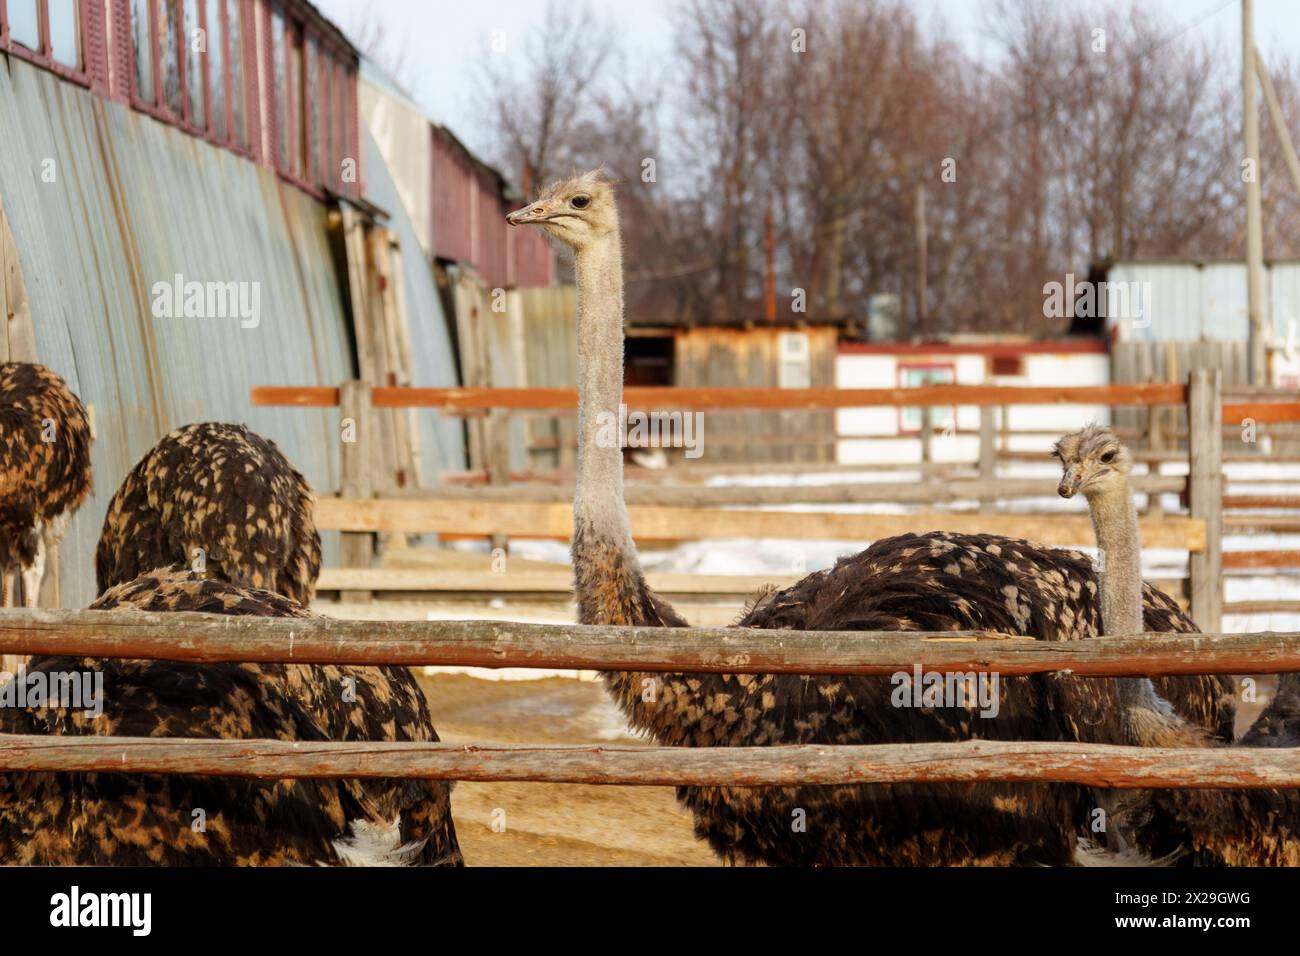 An elegant ostrich with its head held high, standing gracefully in a rustic barn. Stock Photo